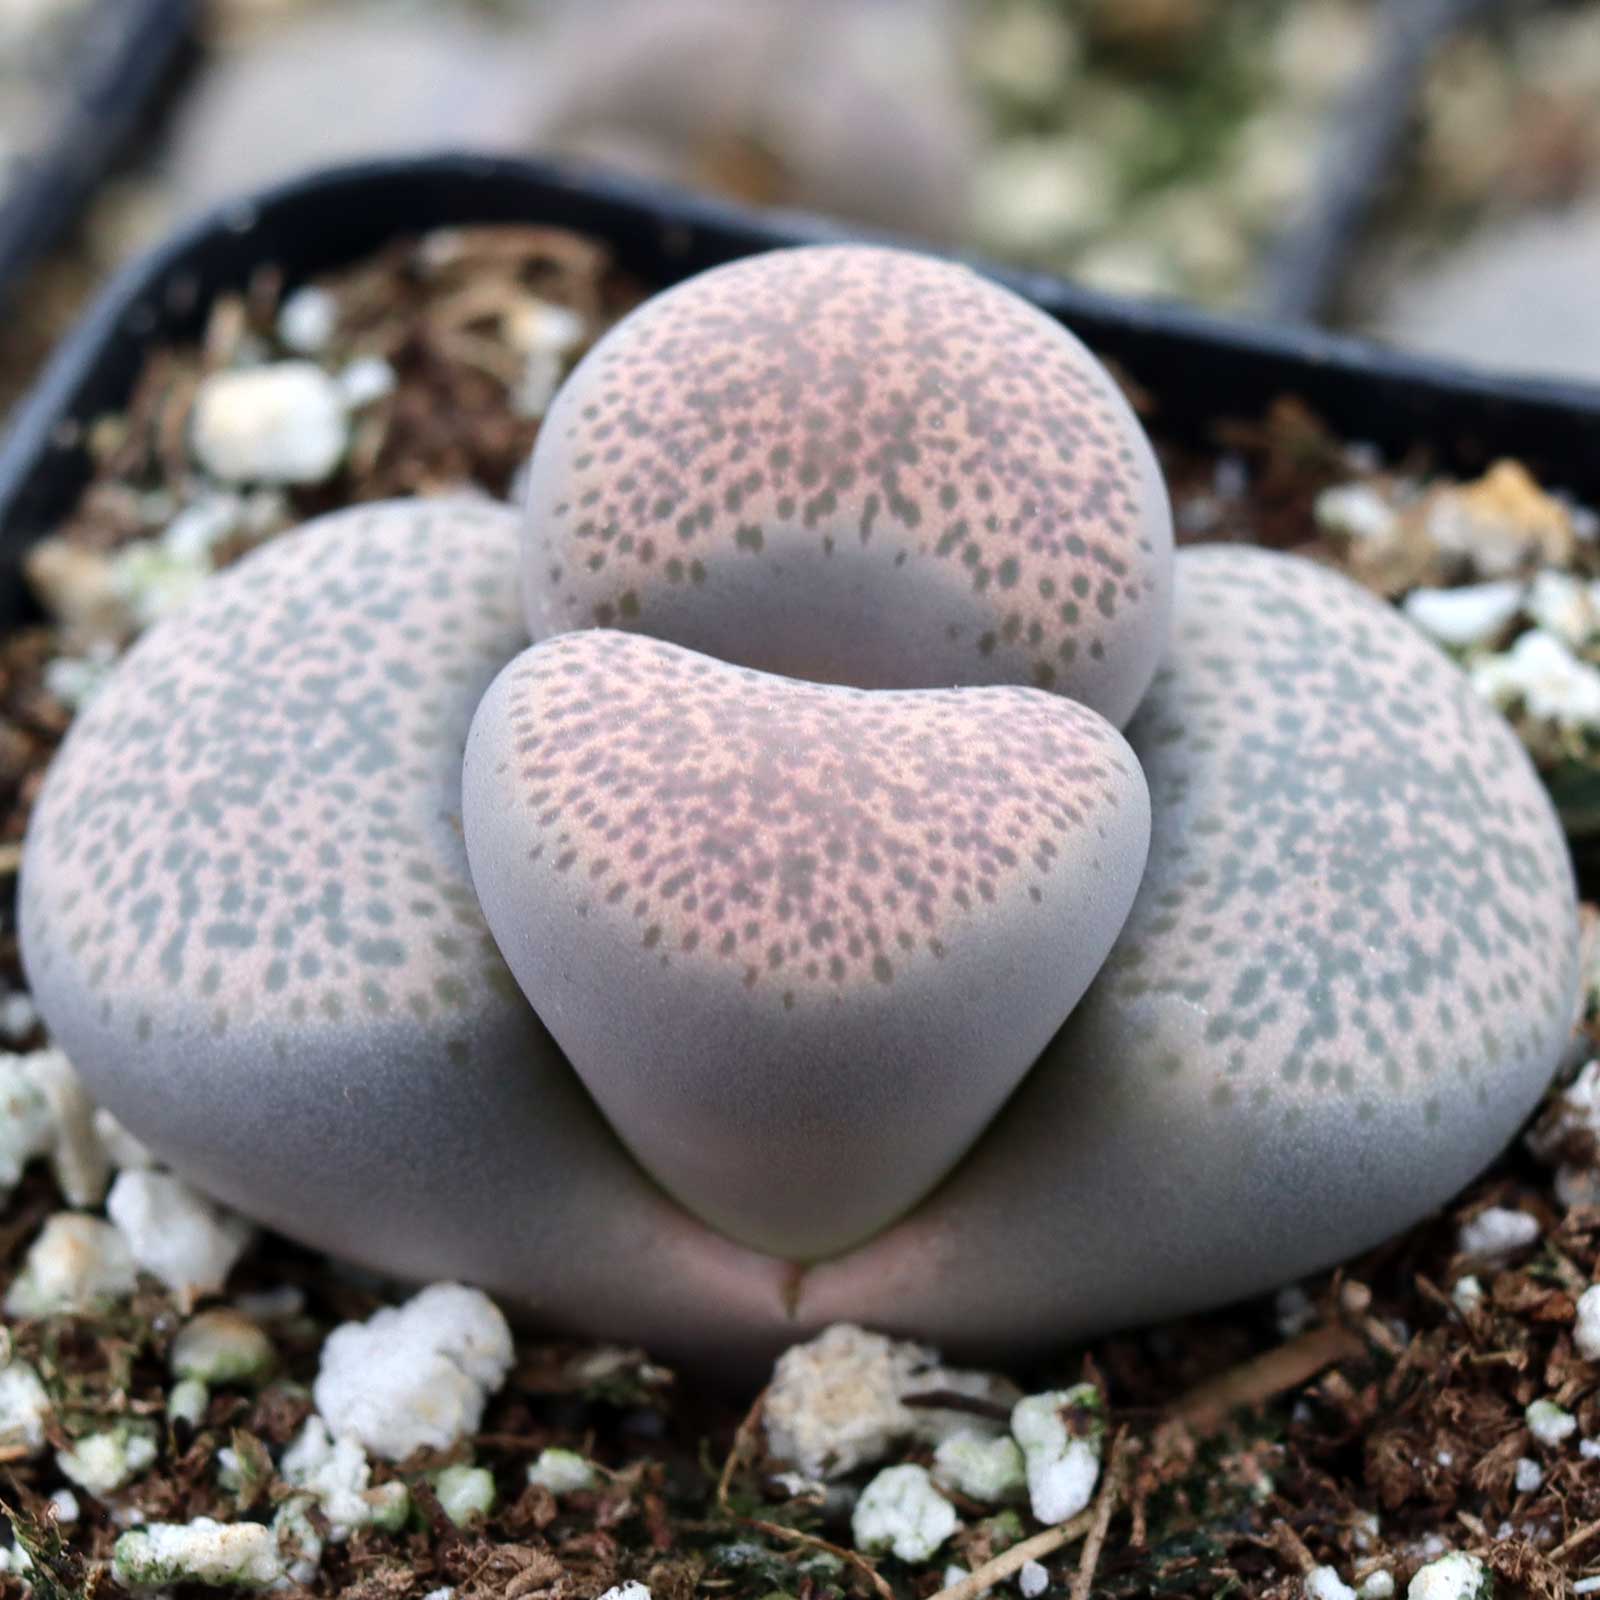 Lithops localis - Local Living Stone Questions & Answers